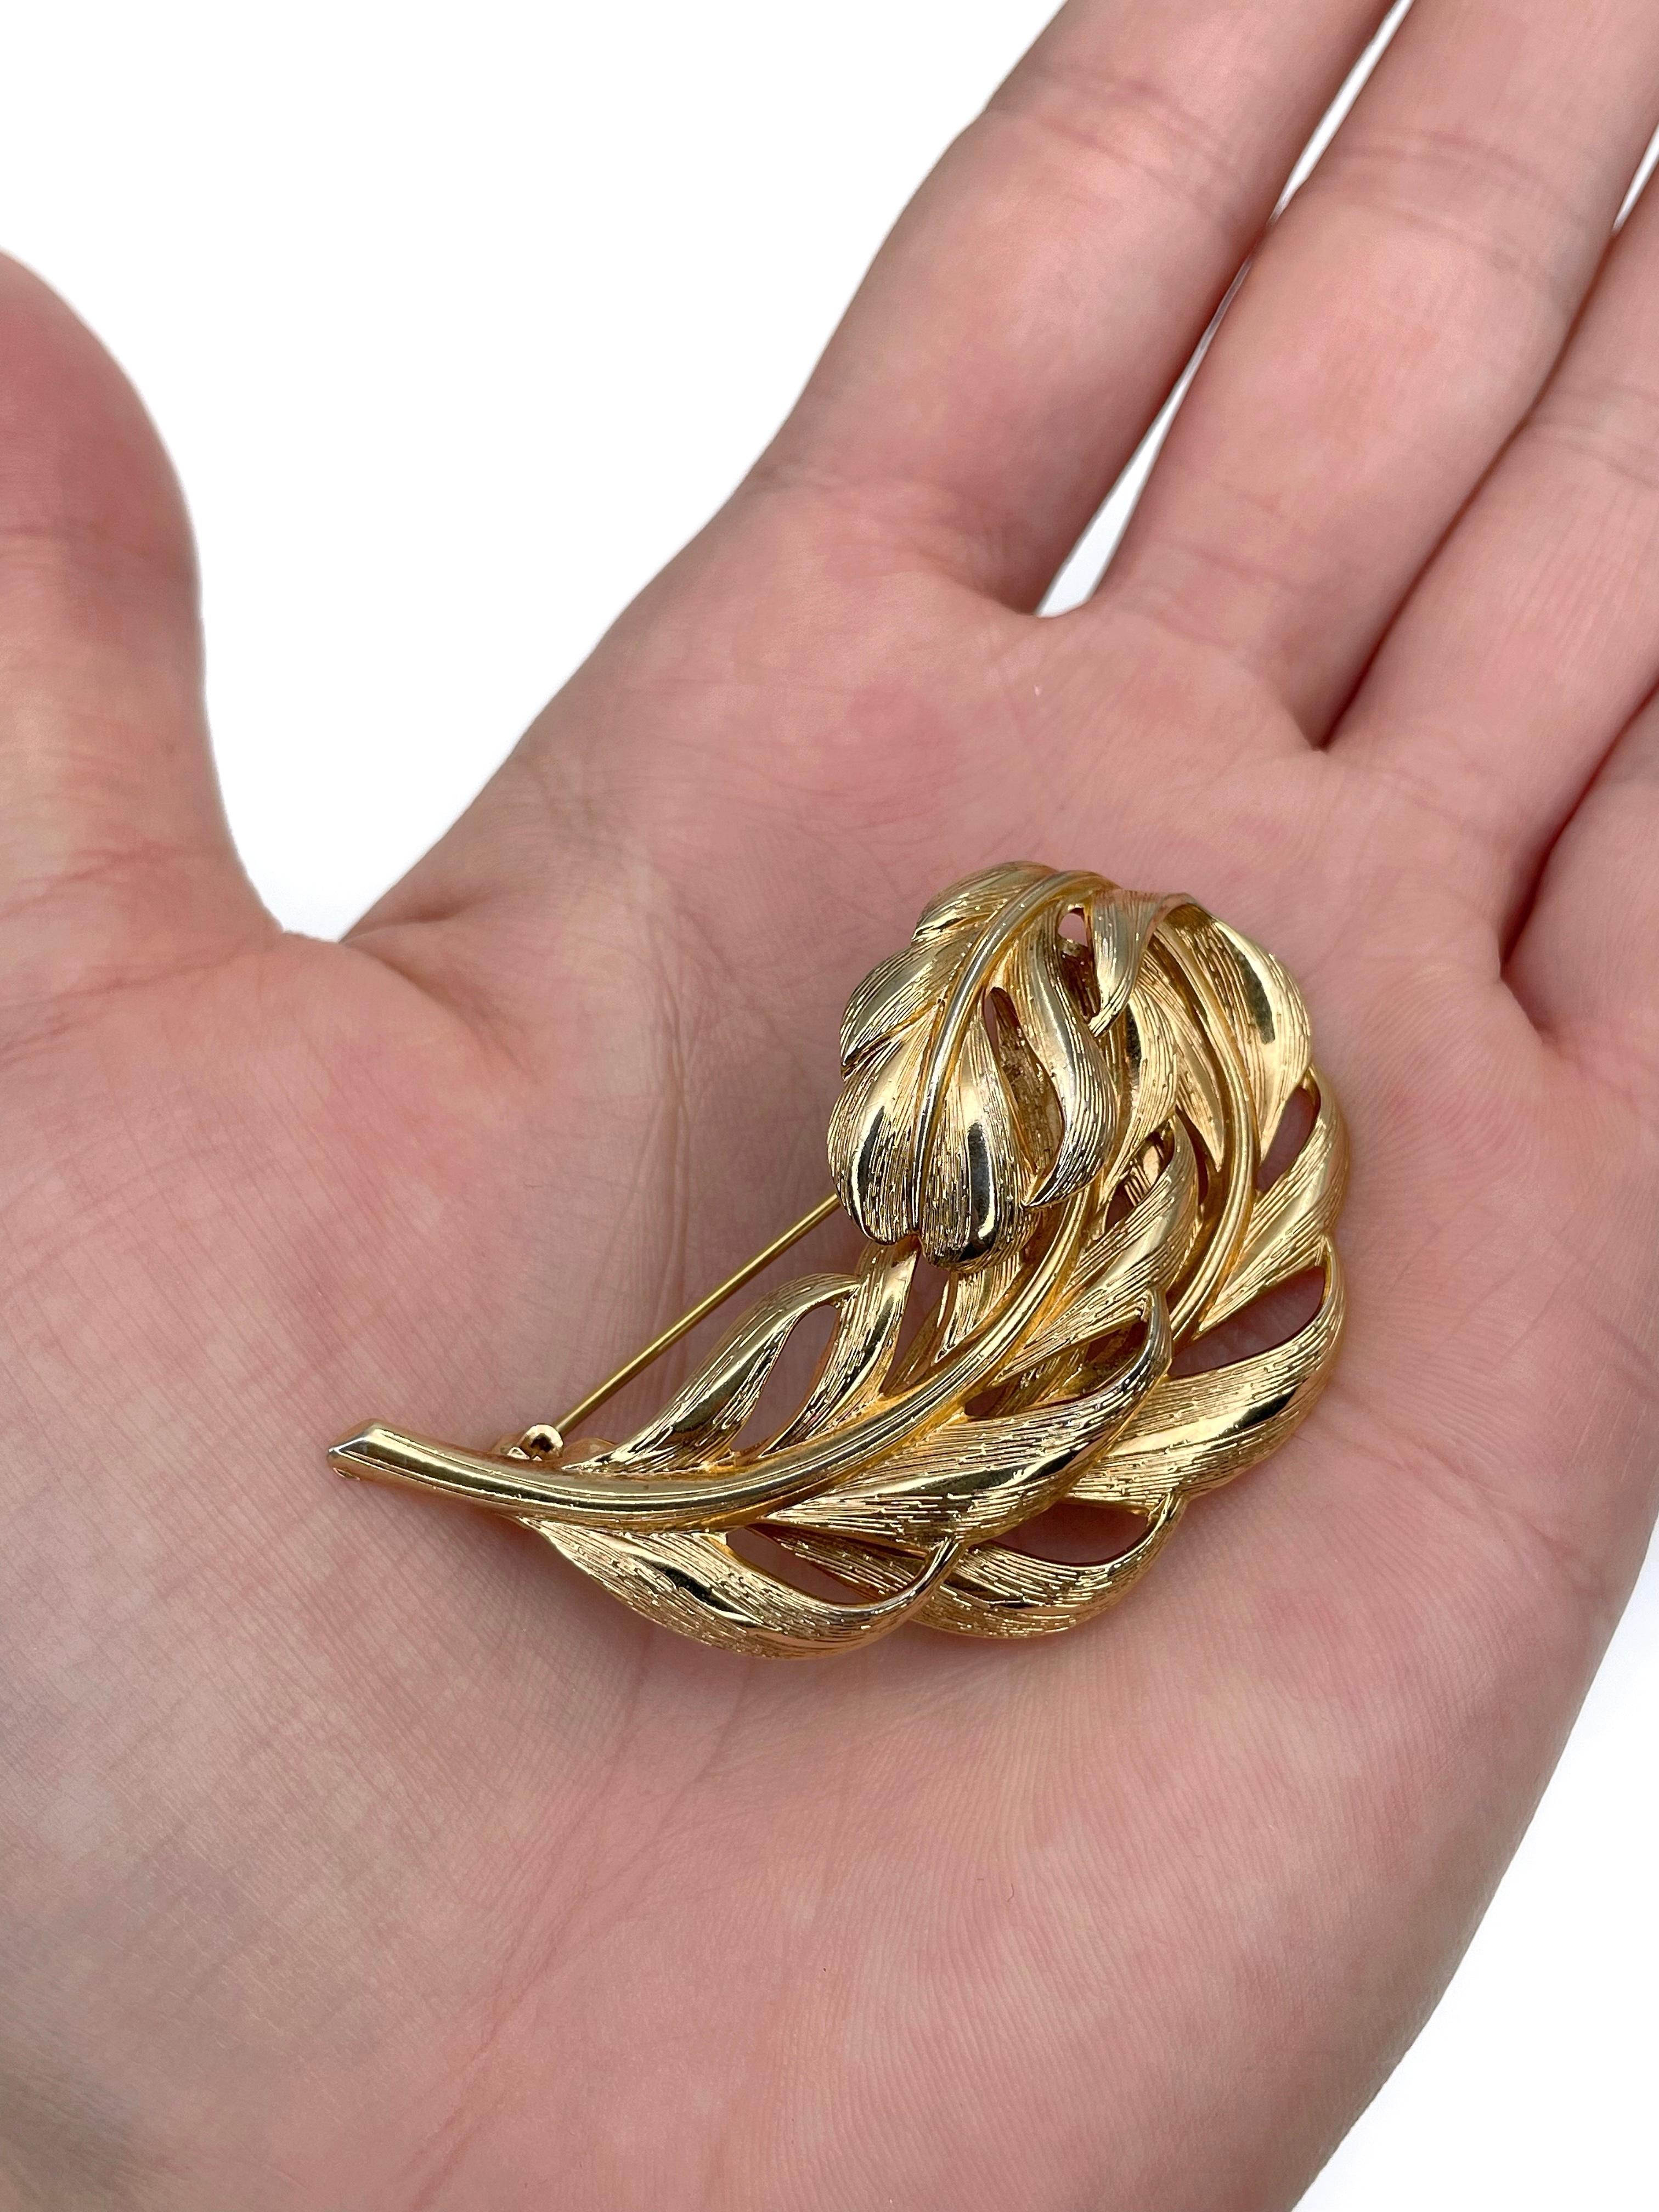 This is an elegant vintage leaf pin brooch designed by Grosse in 1965. This piece is gold plated. 

Signed: “Grosse© 1965 Germany” (shown in photos).

Size: 5x3cm

———

If you have any questions, please feel free to ask. We describe our items